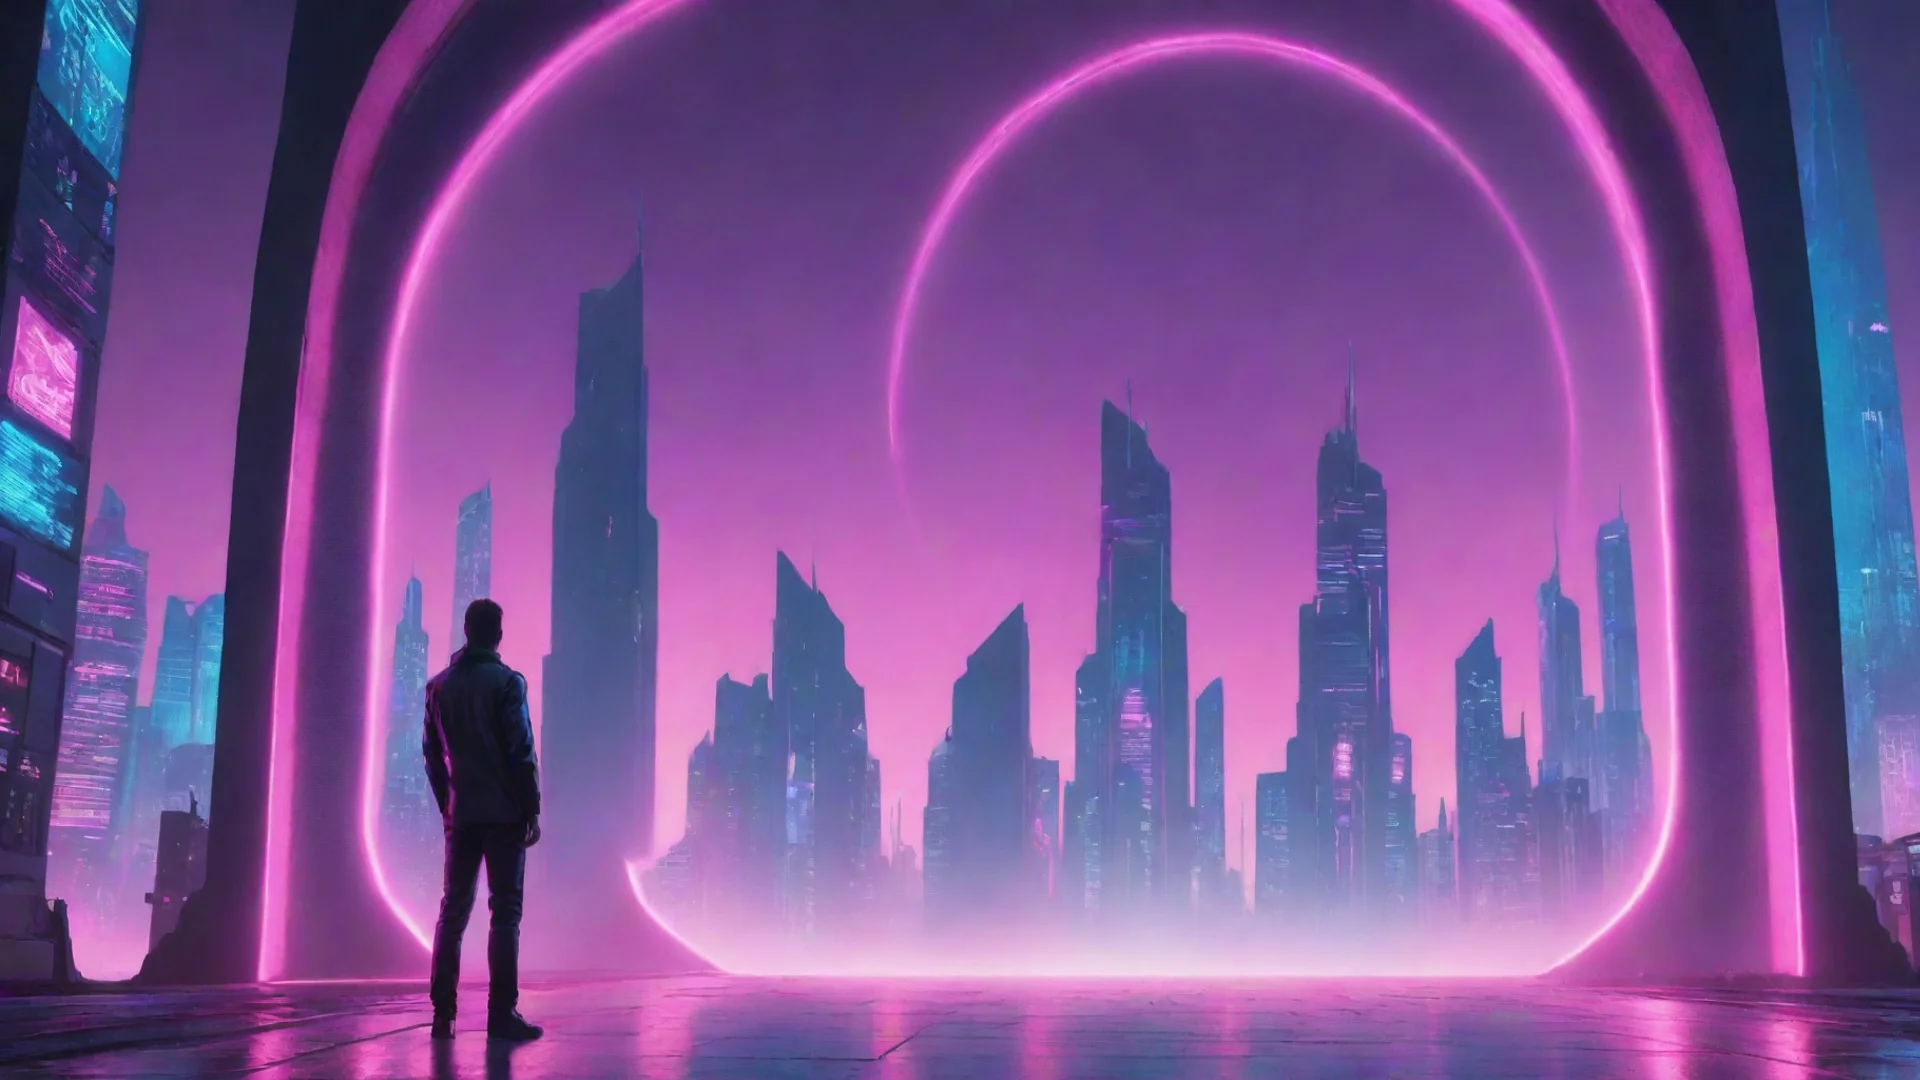 amazing synthwave of one man standing behind the portal of the futuristic city awesome portrait 2 wide